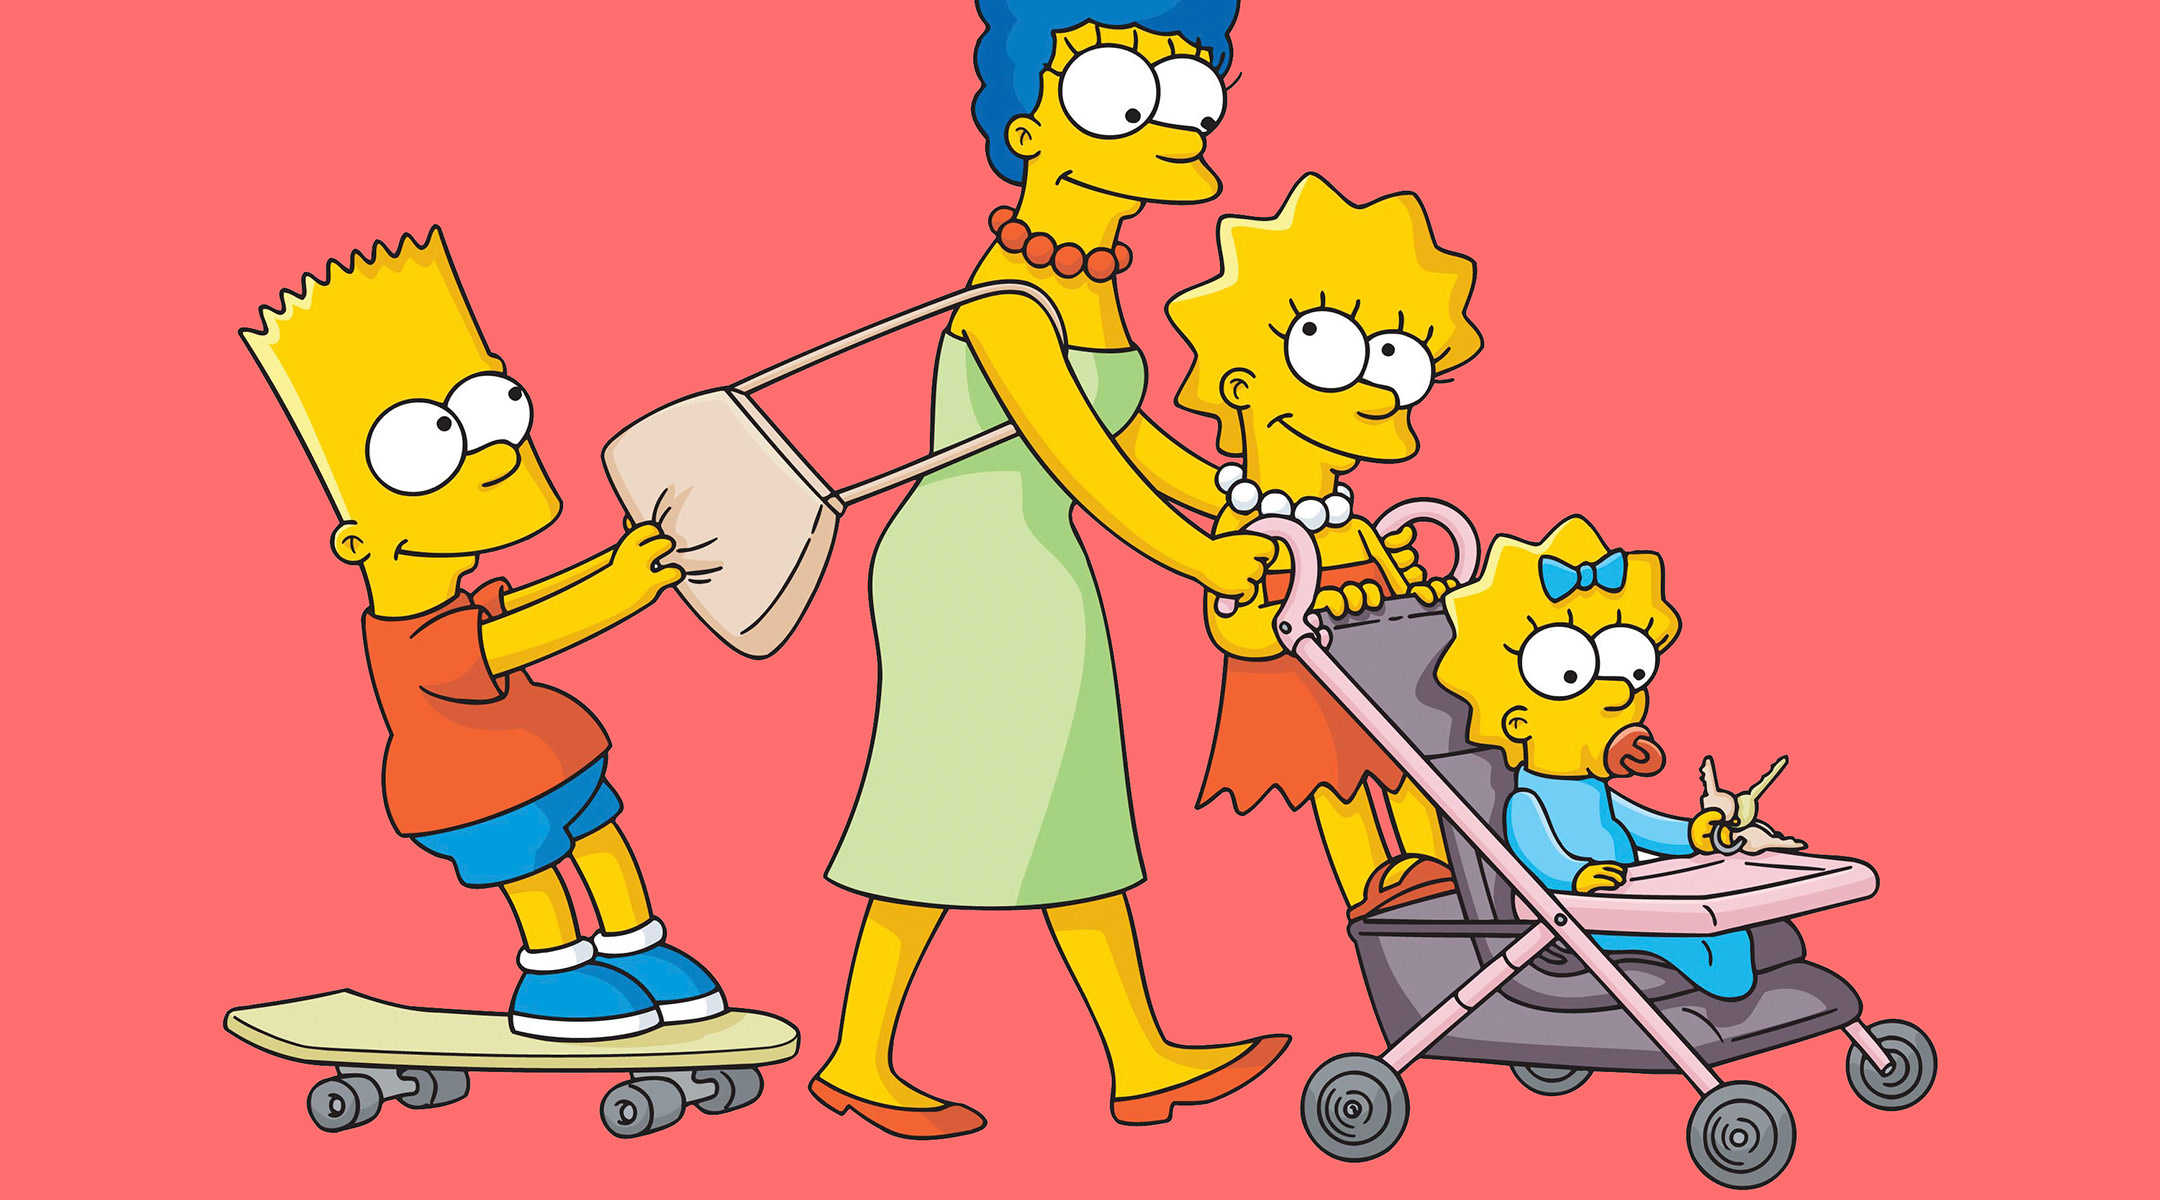 Marge Simpson with Bart, Lisa, and Maggie